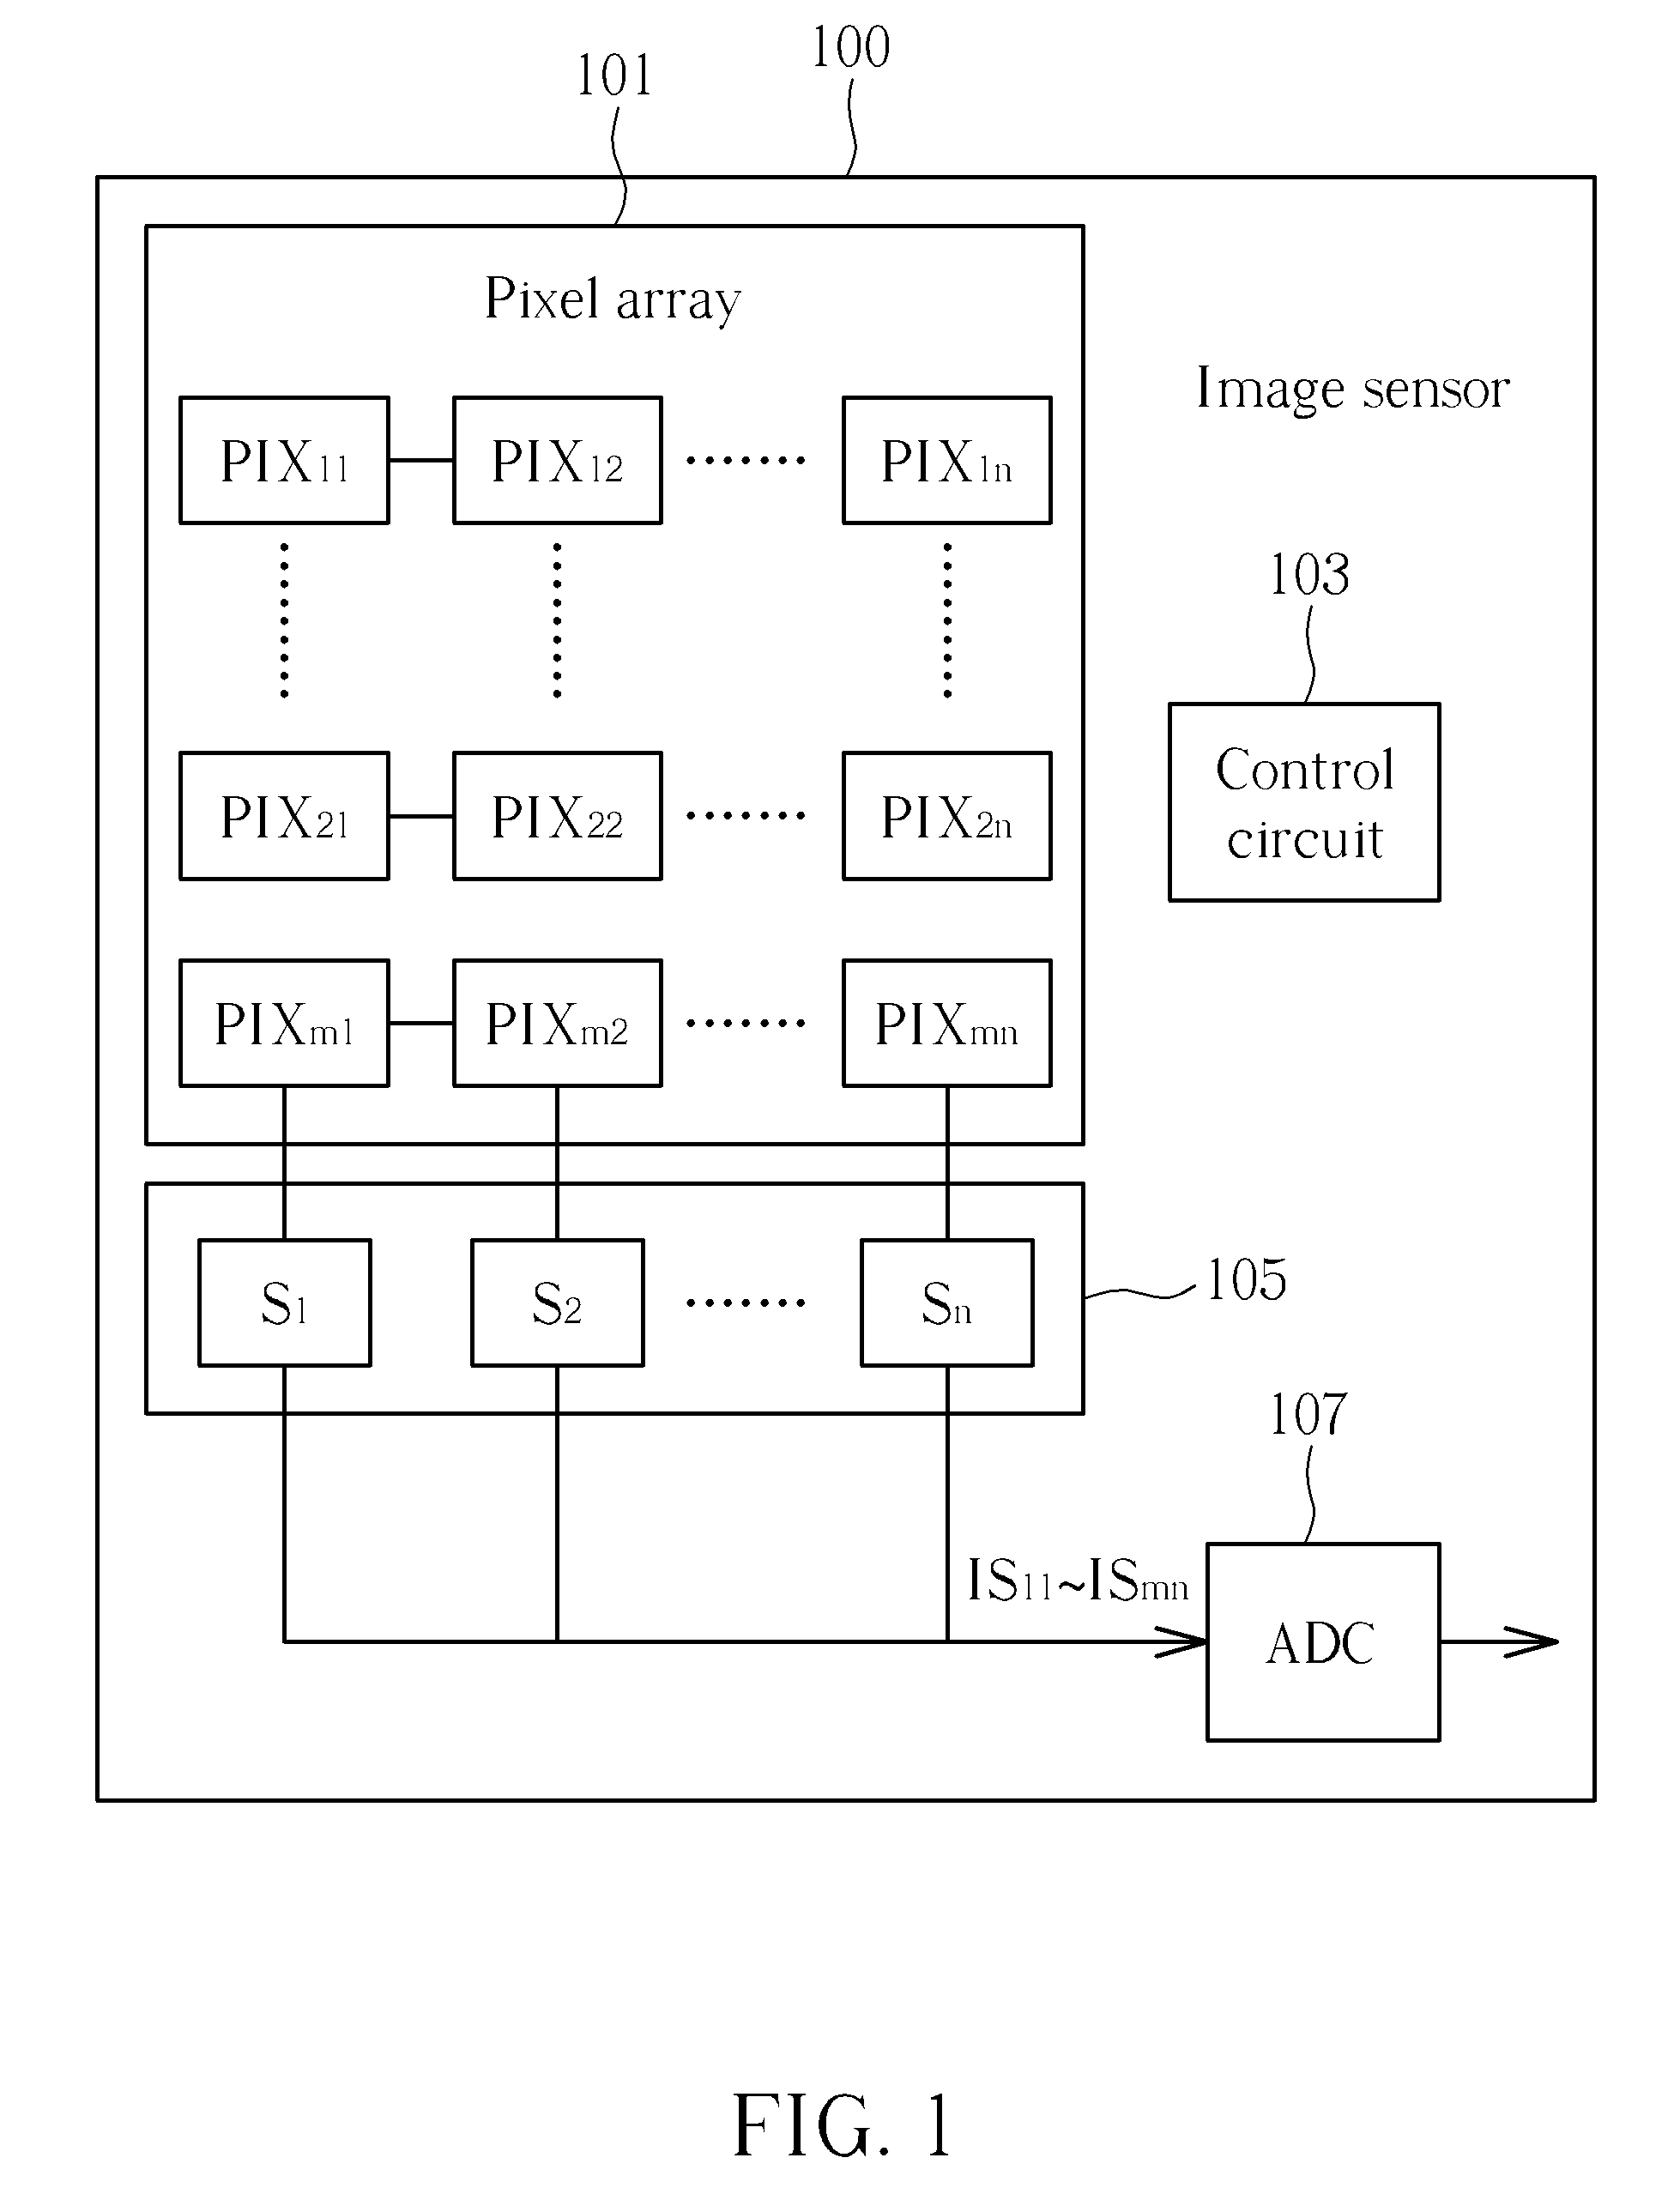 Dual low voltage levels for control of transfer switch device in pixel array